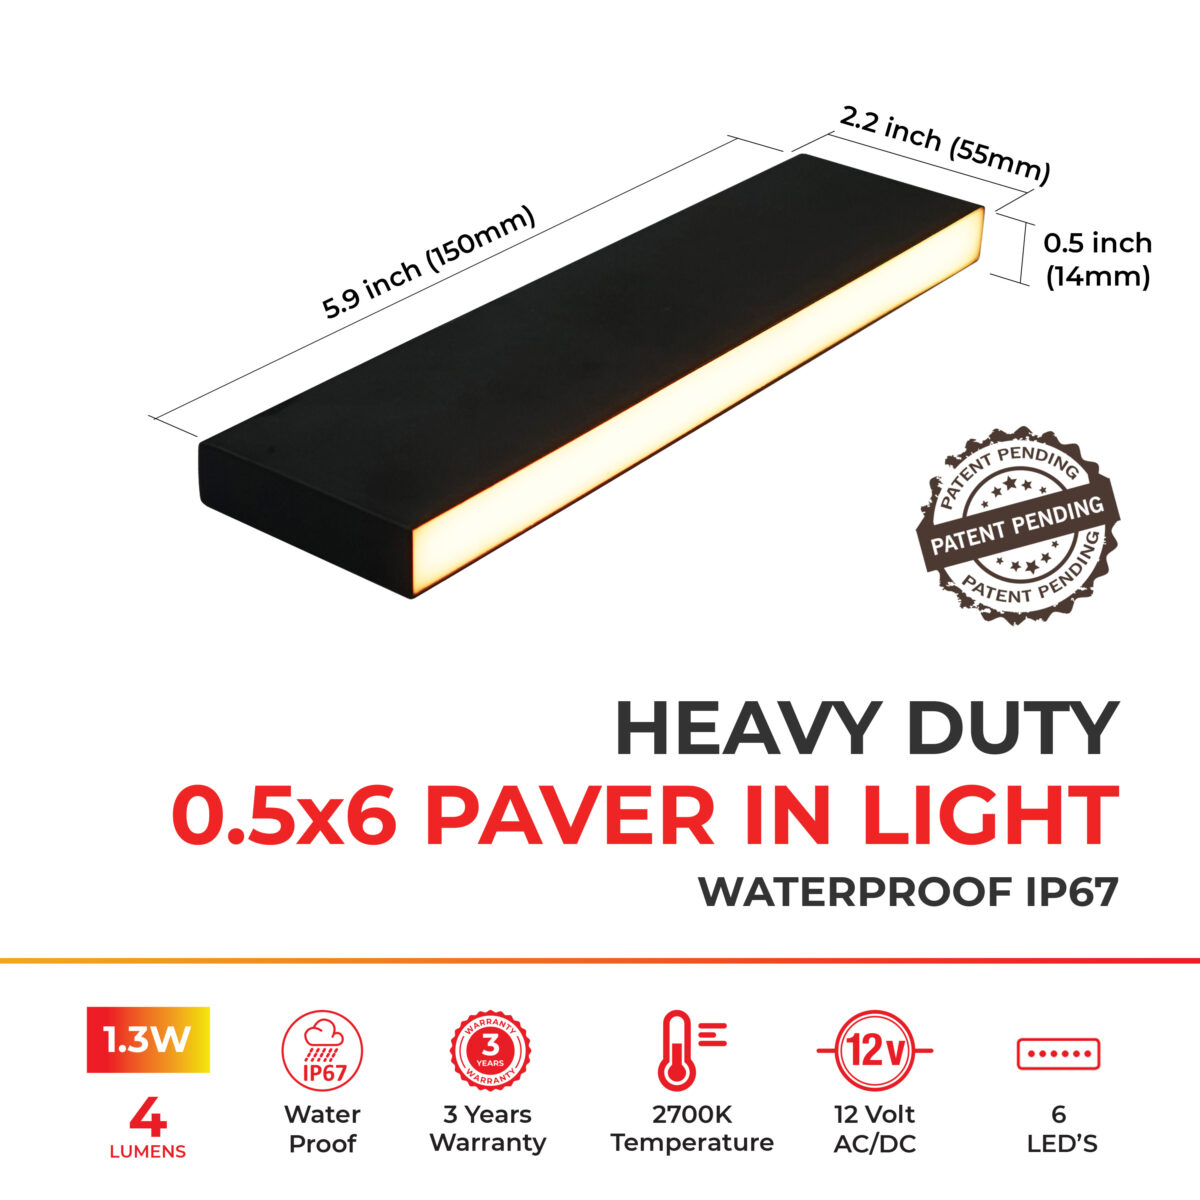 Compact Dimensions of 0.5x6 Paver Light